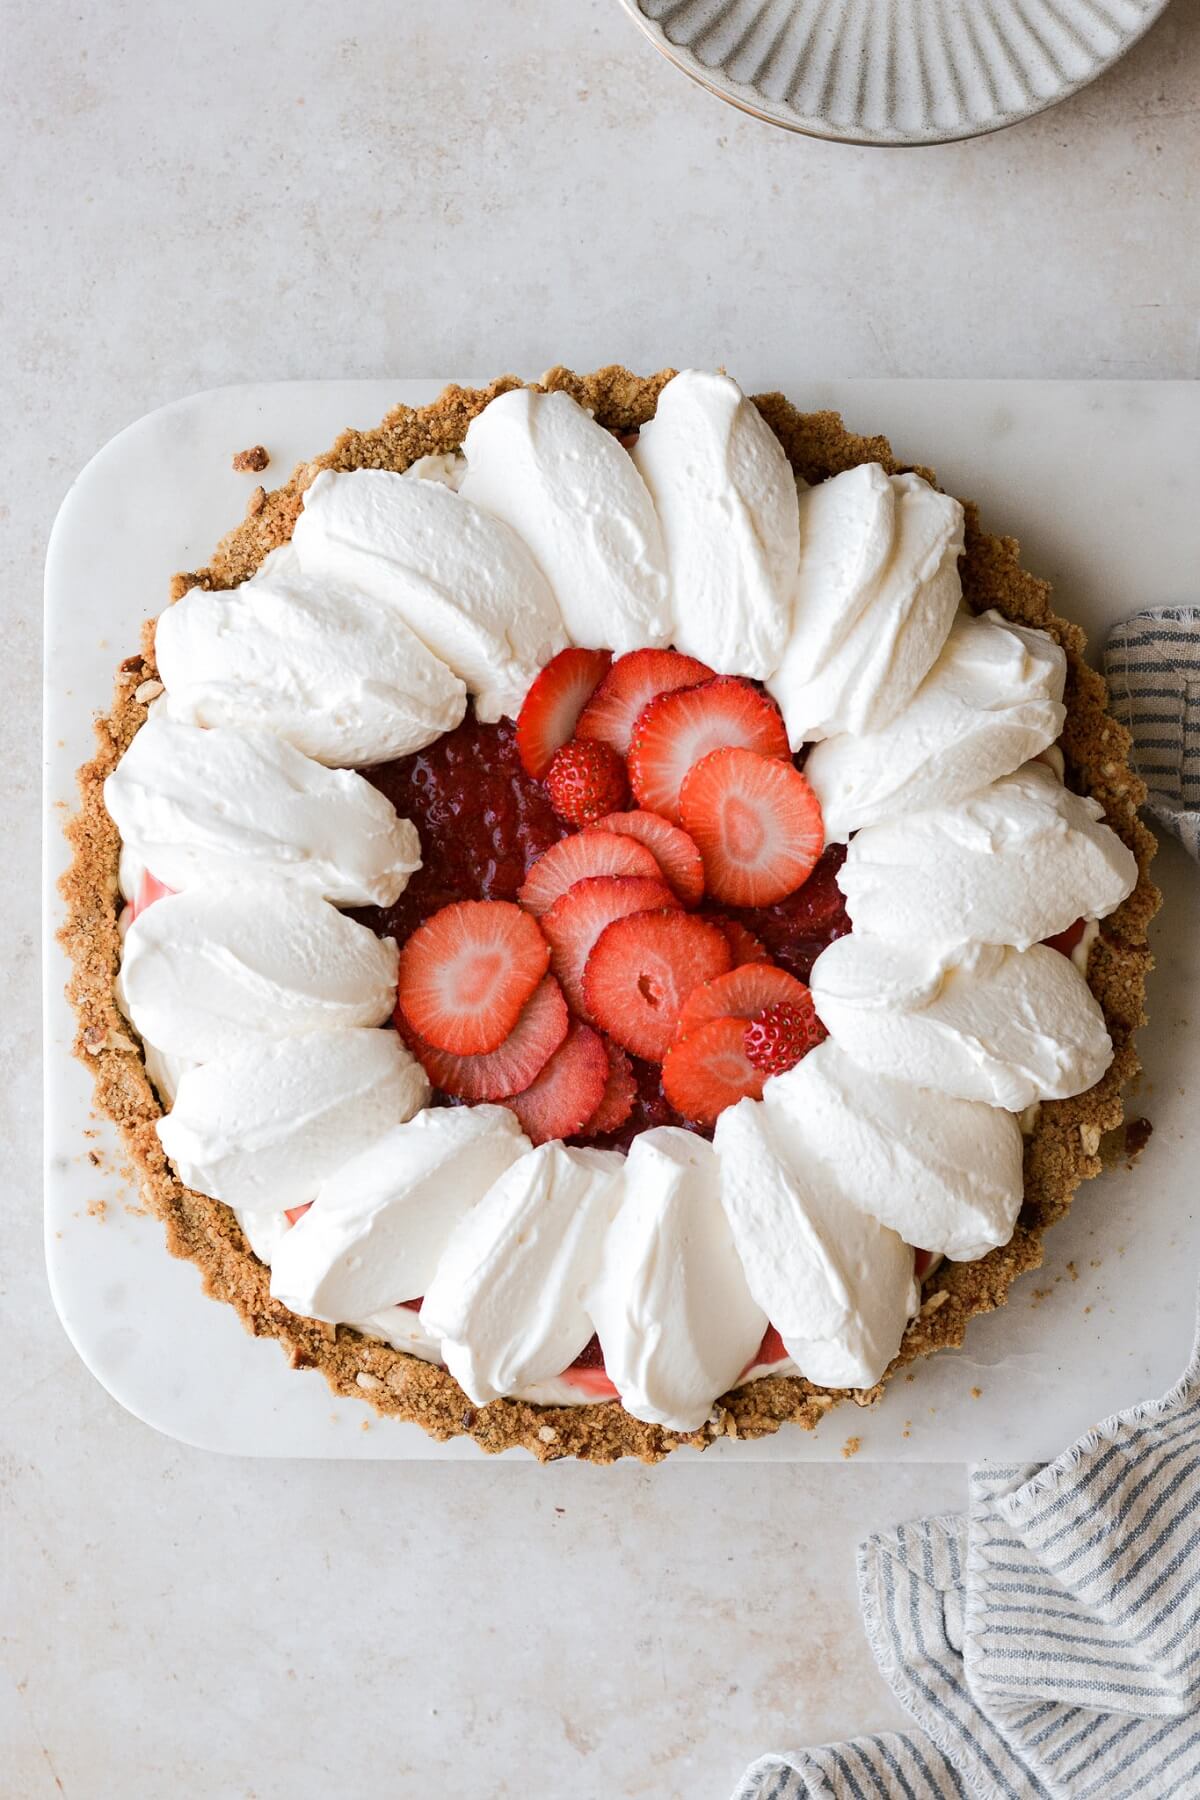 Strawberry cream cheese pretzel pie with whipped cream and sliced strawberries.